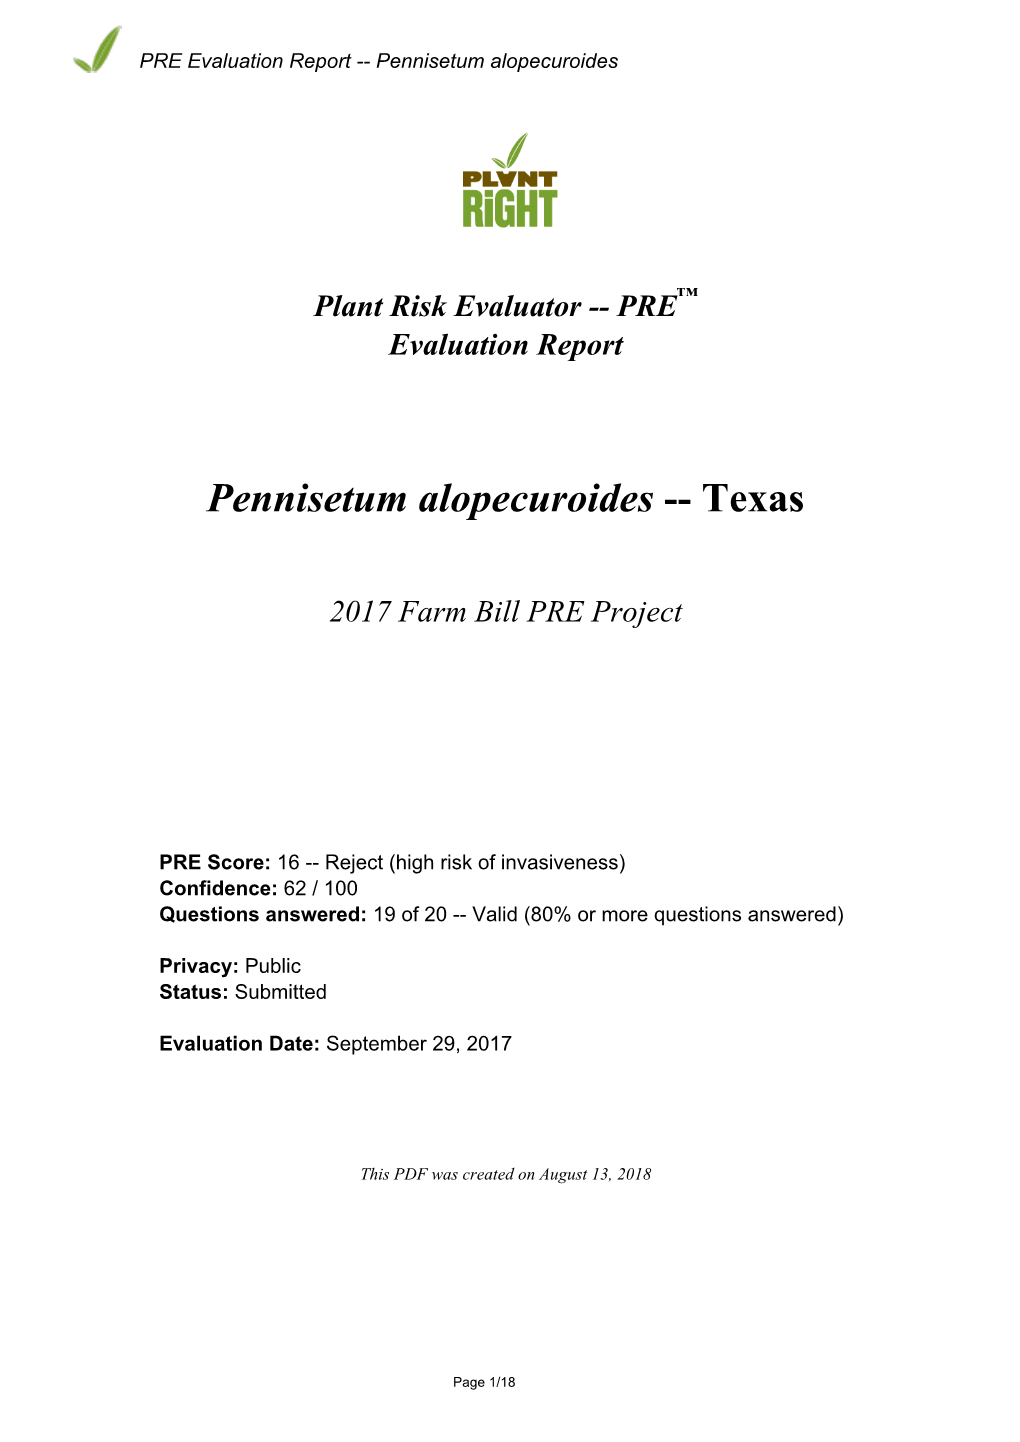 PRE Evaluation Report for Pennisetum Alopecuroides